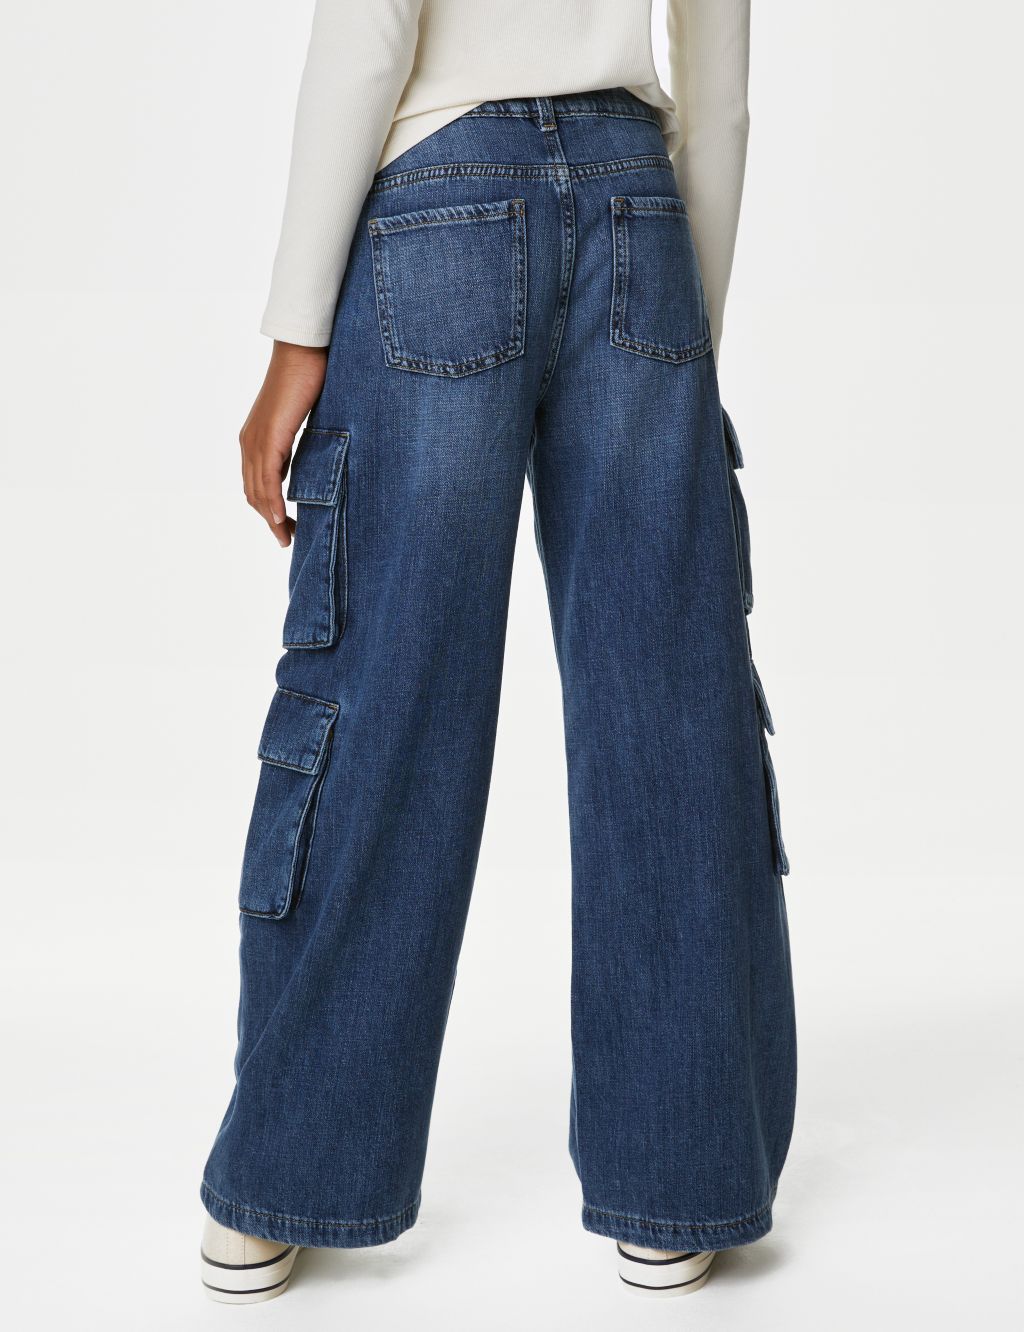 90's Baggy Low Rise Denim Cargo Jeans (6-16 Yrs) image 5